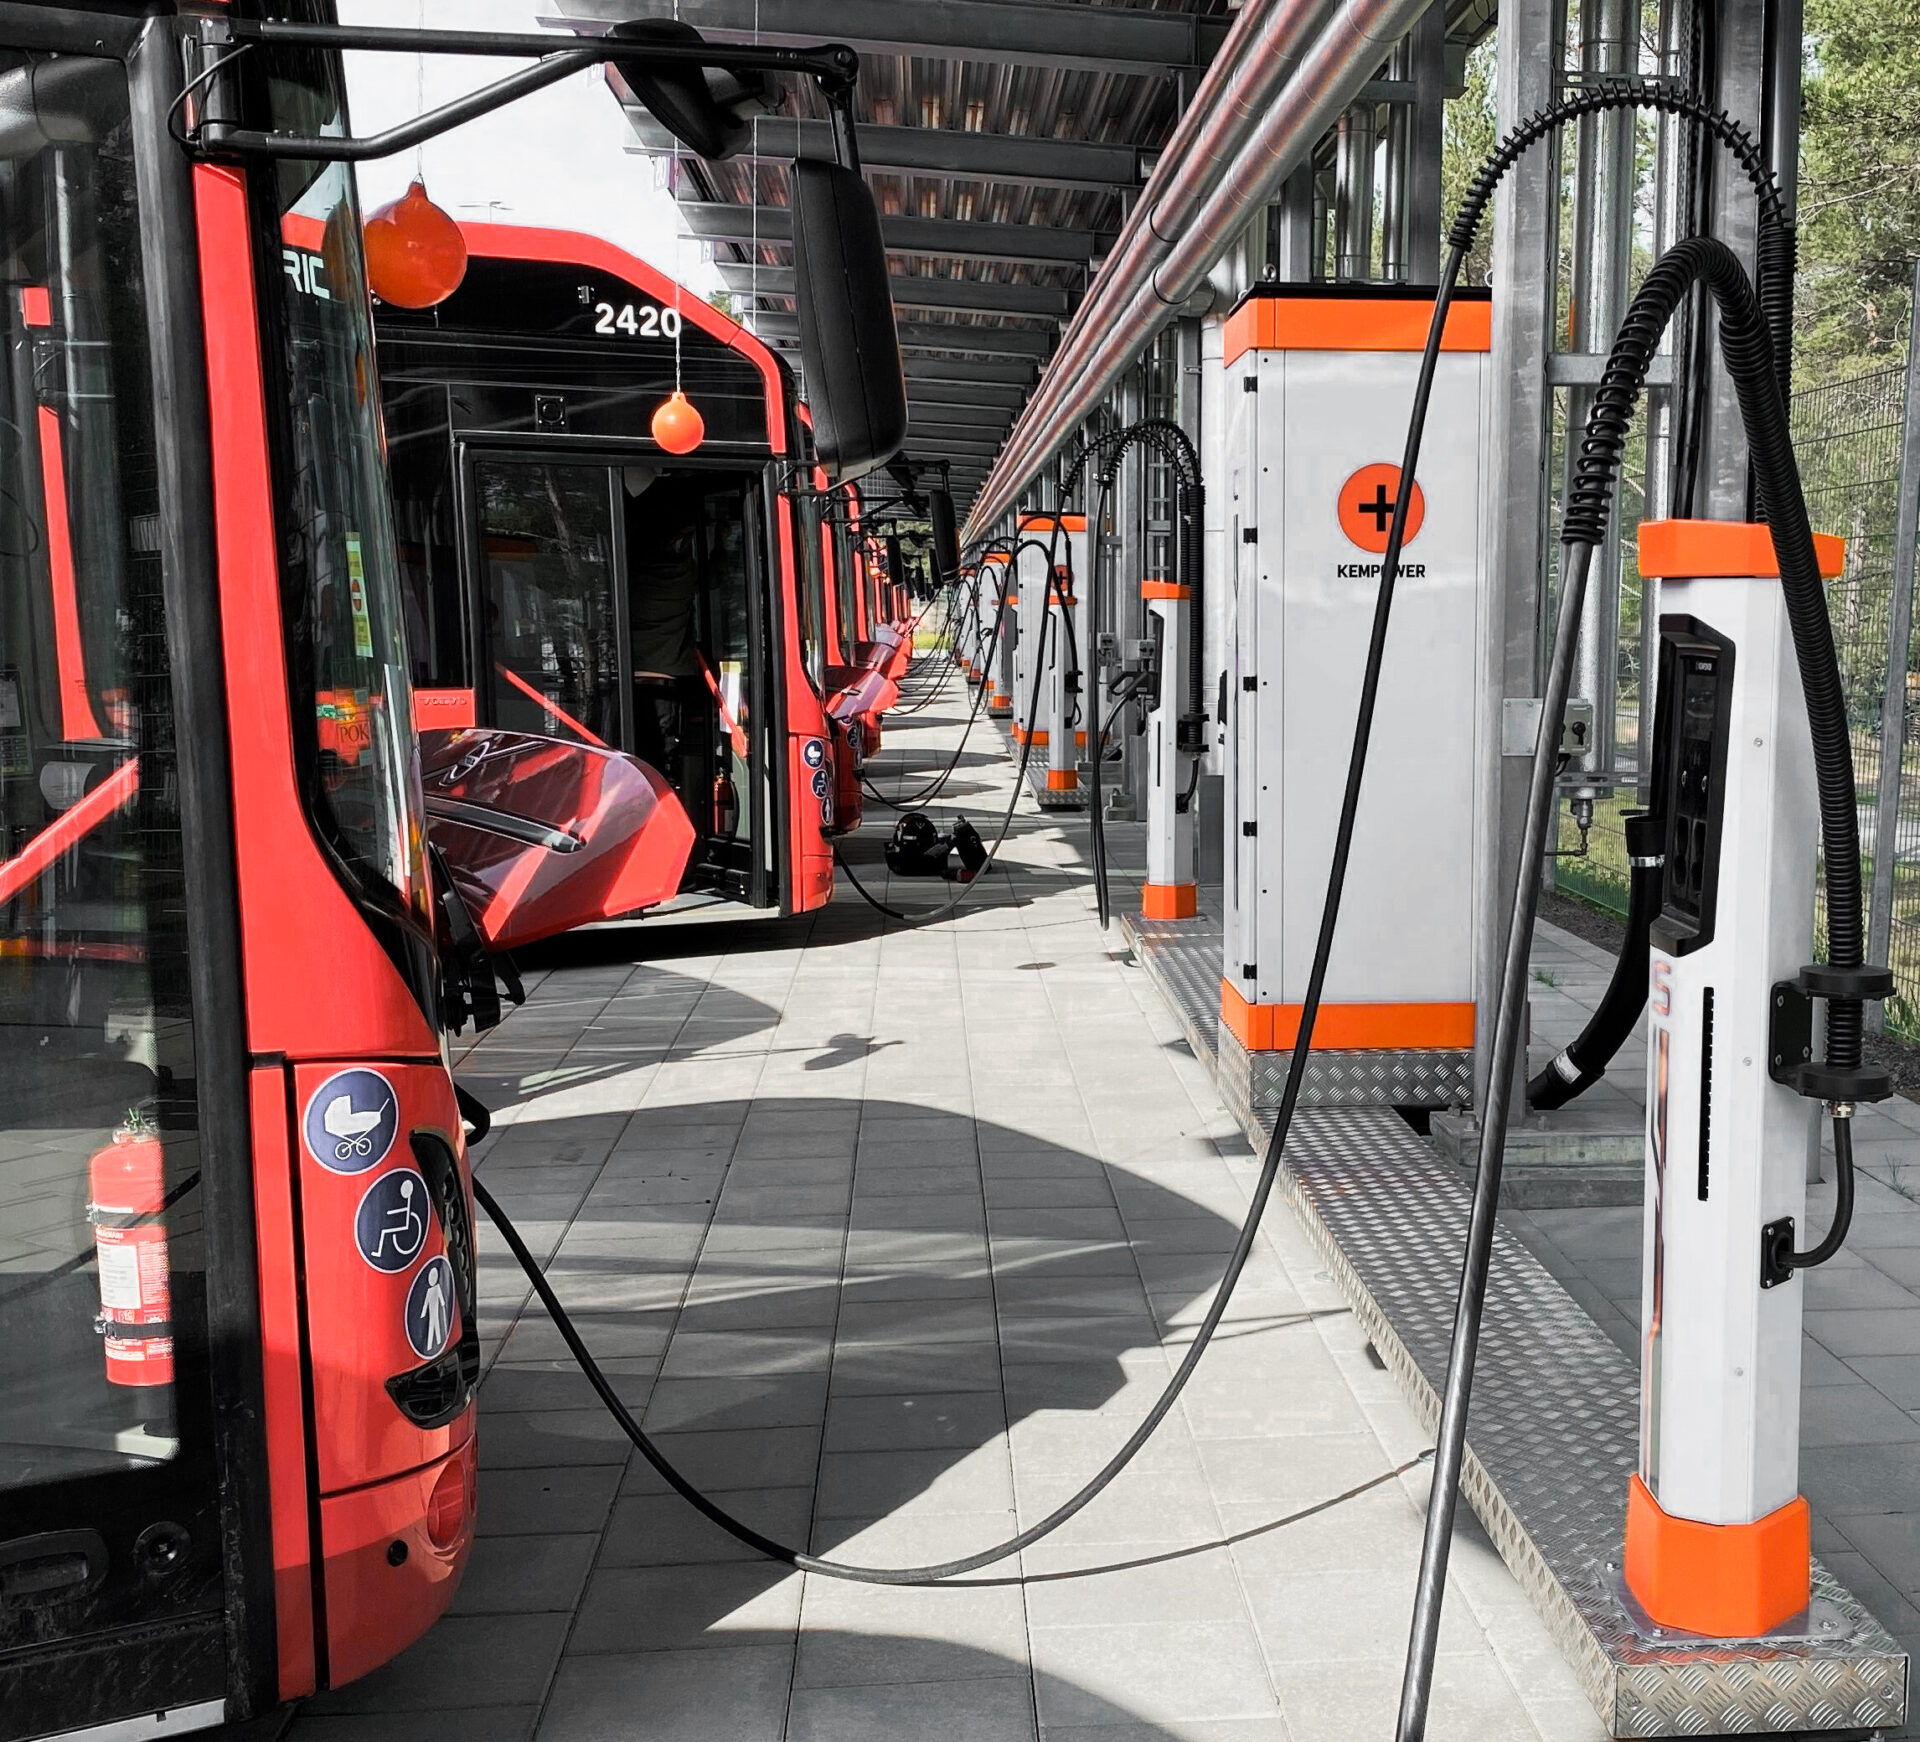 A fleet of electric buses parked at charging stations, powering up for their next route.